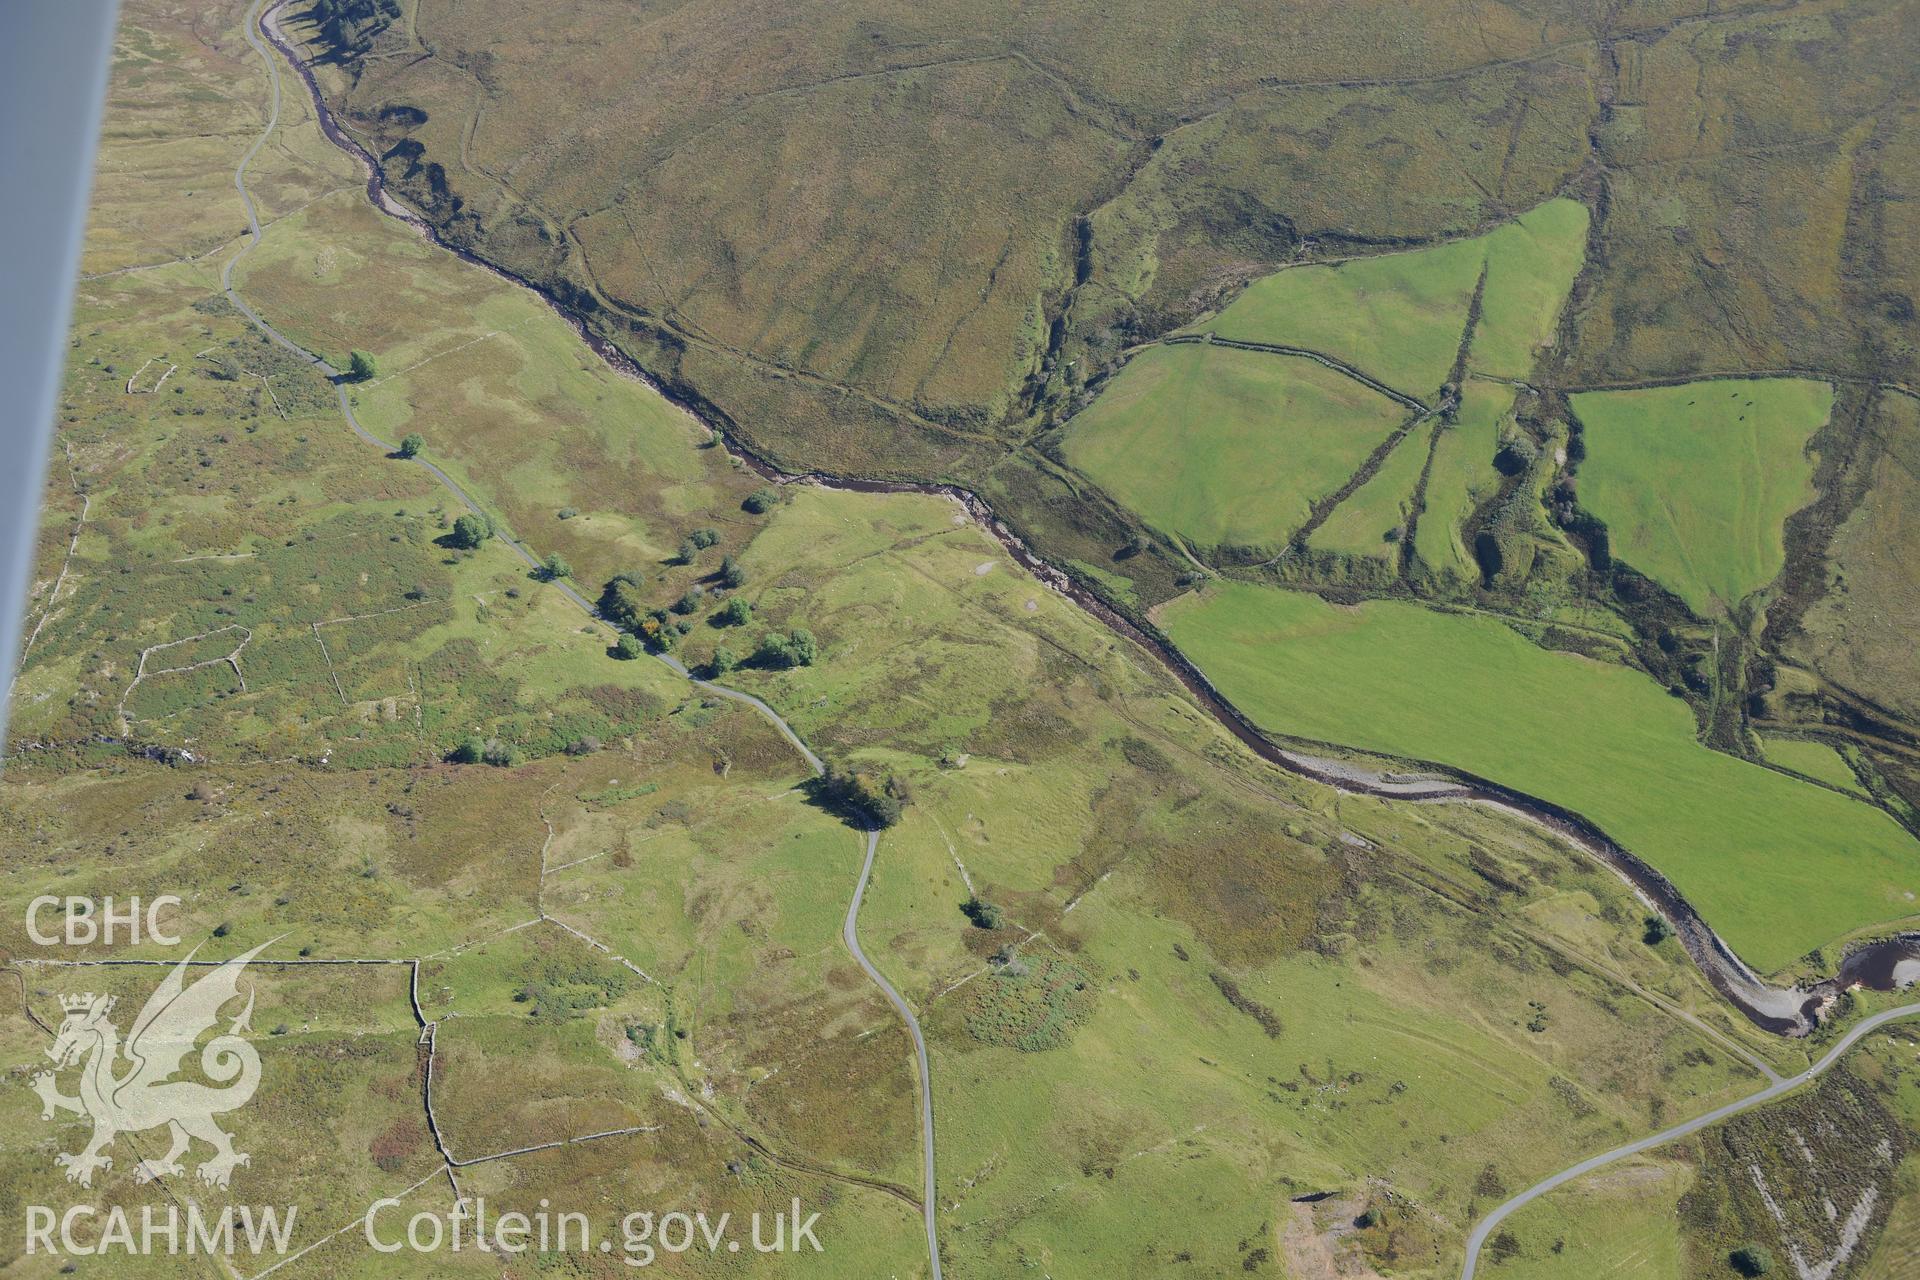 Structure at Gelli Gain; shelter, stock enclosure and trial mine north east of Gelli Gain and Bronaber firing range. Oblique aerial photograph taken during the Royal Commission's programme of archaeological aerial reconnaissance by Toby Driver on 2nd October 2015.